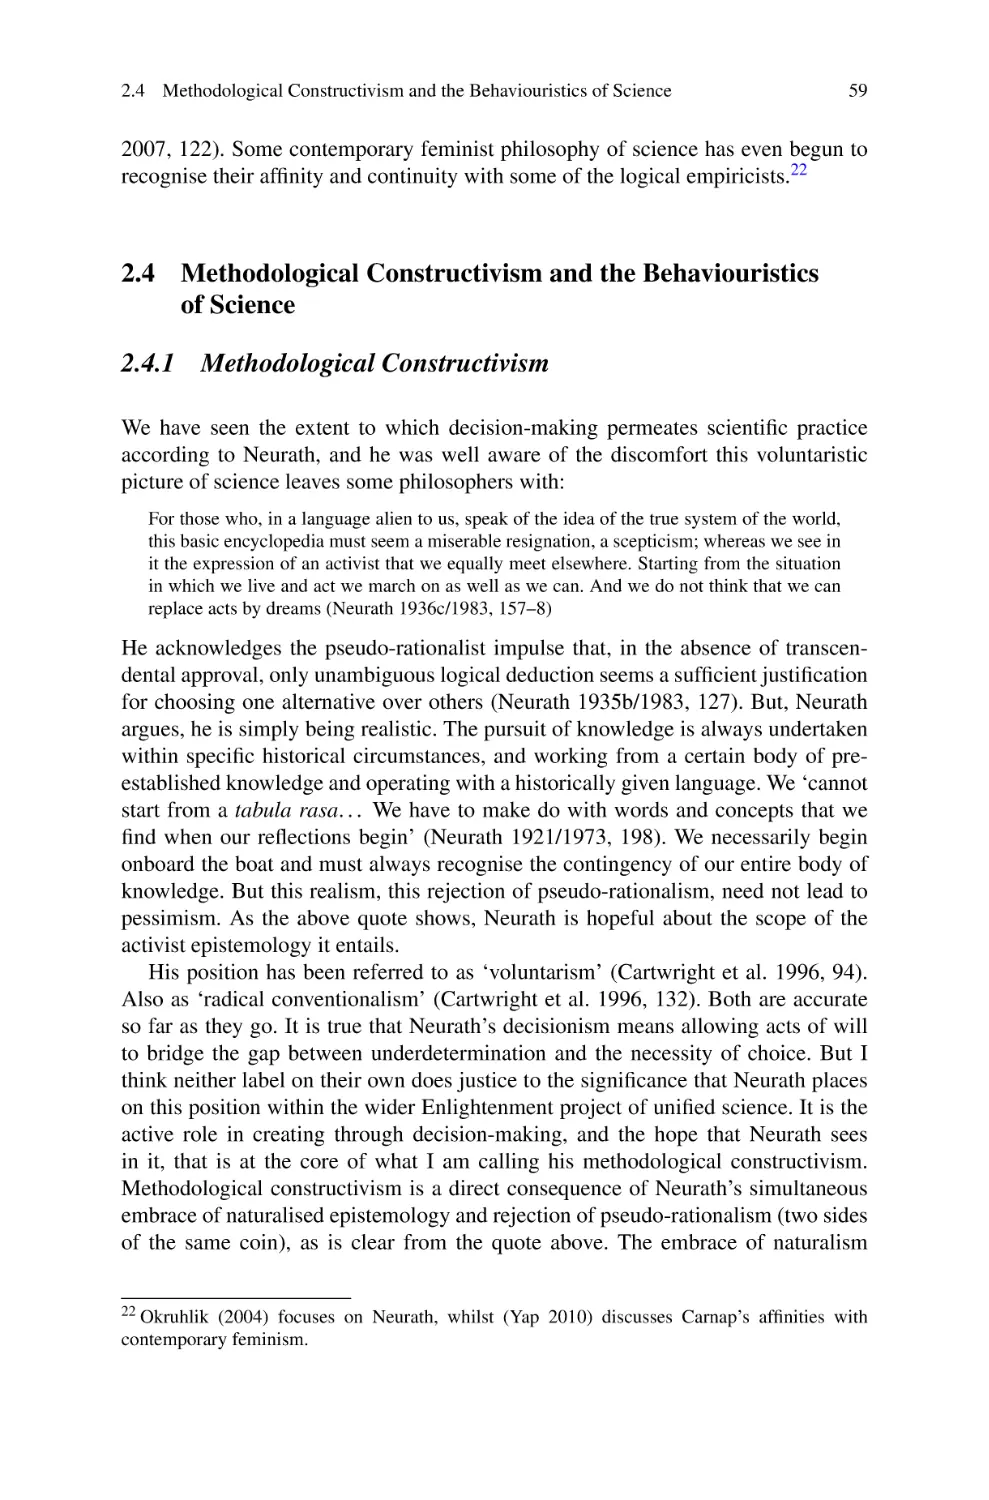 2.4 Methodological Constructivism and the Behaviouristics of Science
2.4.1 Methodological Constructivism